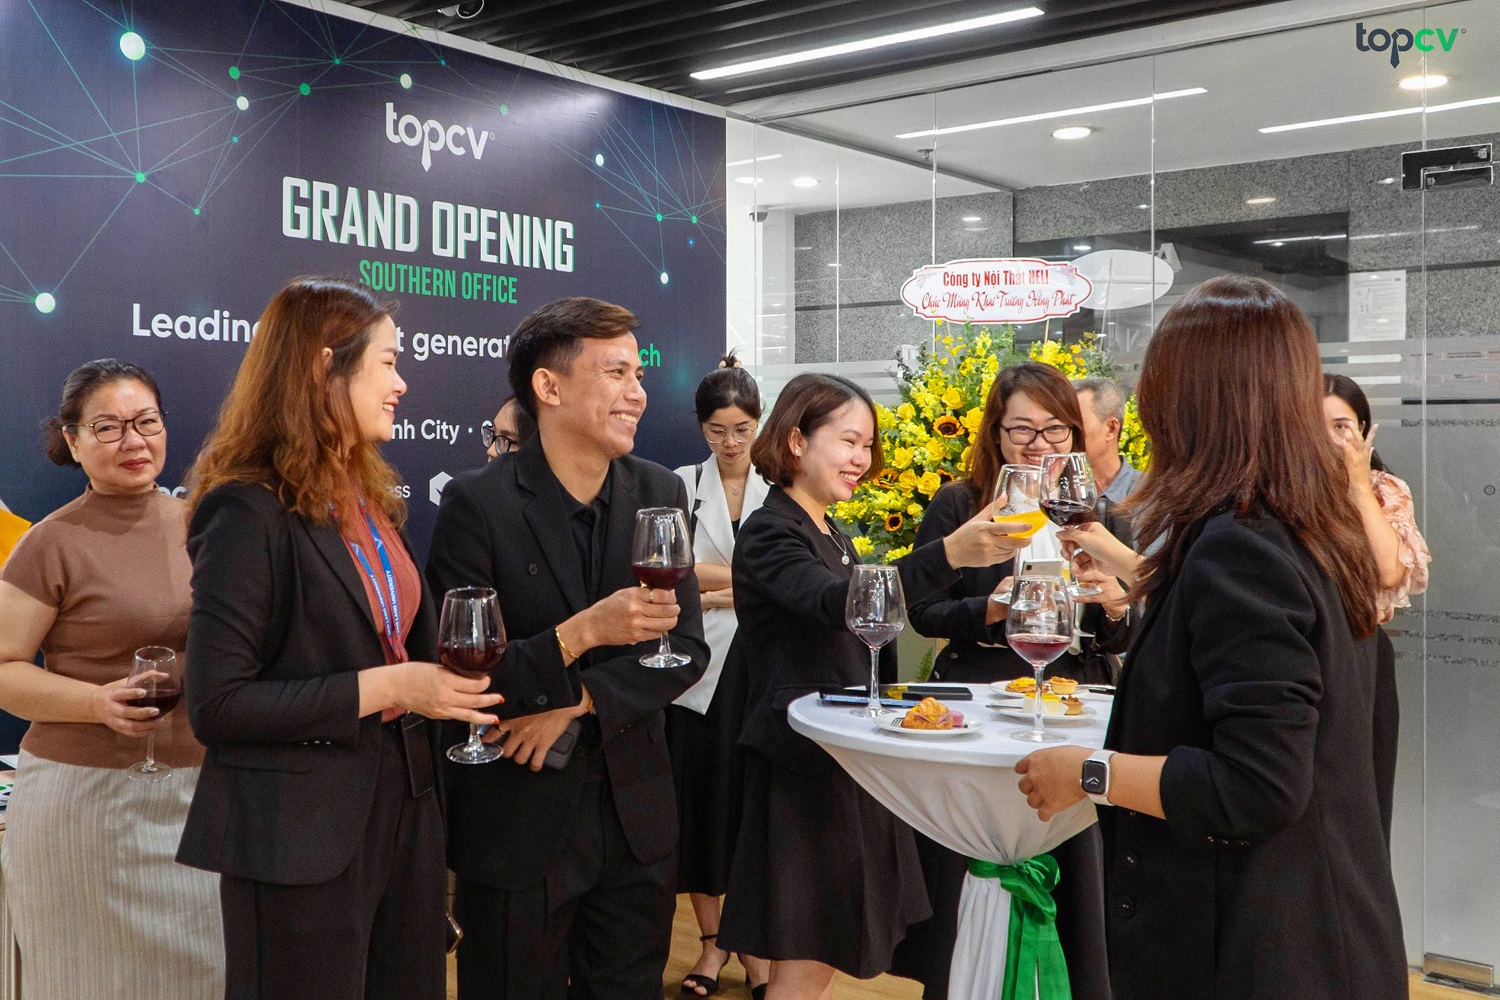 Sự kiện Grand Opening Southern Office - Leading the next generation of HR Tech